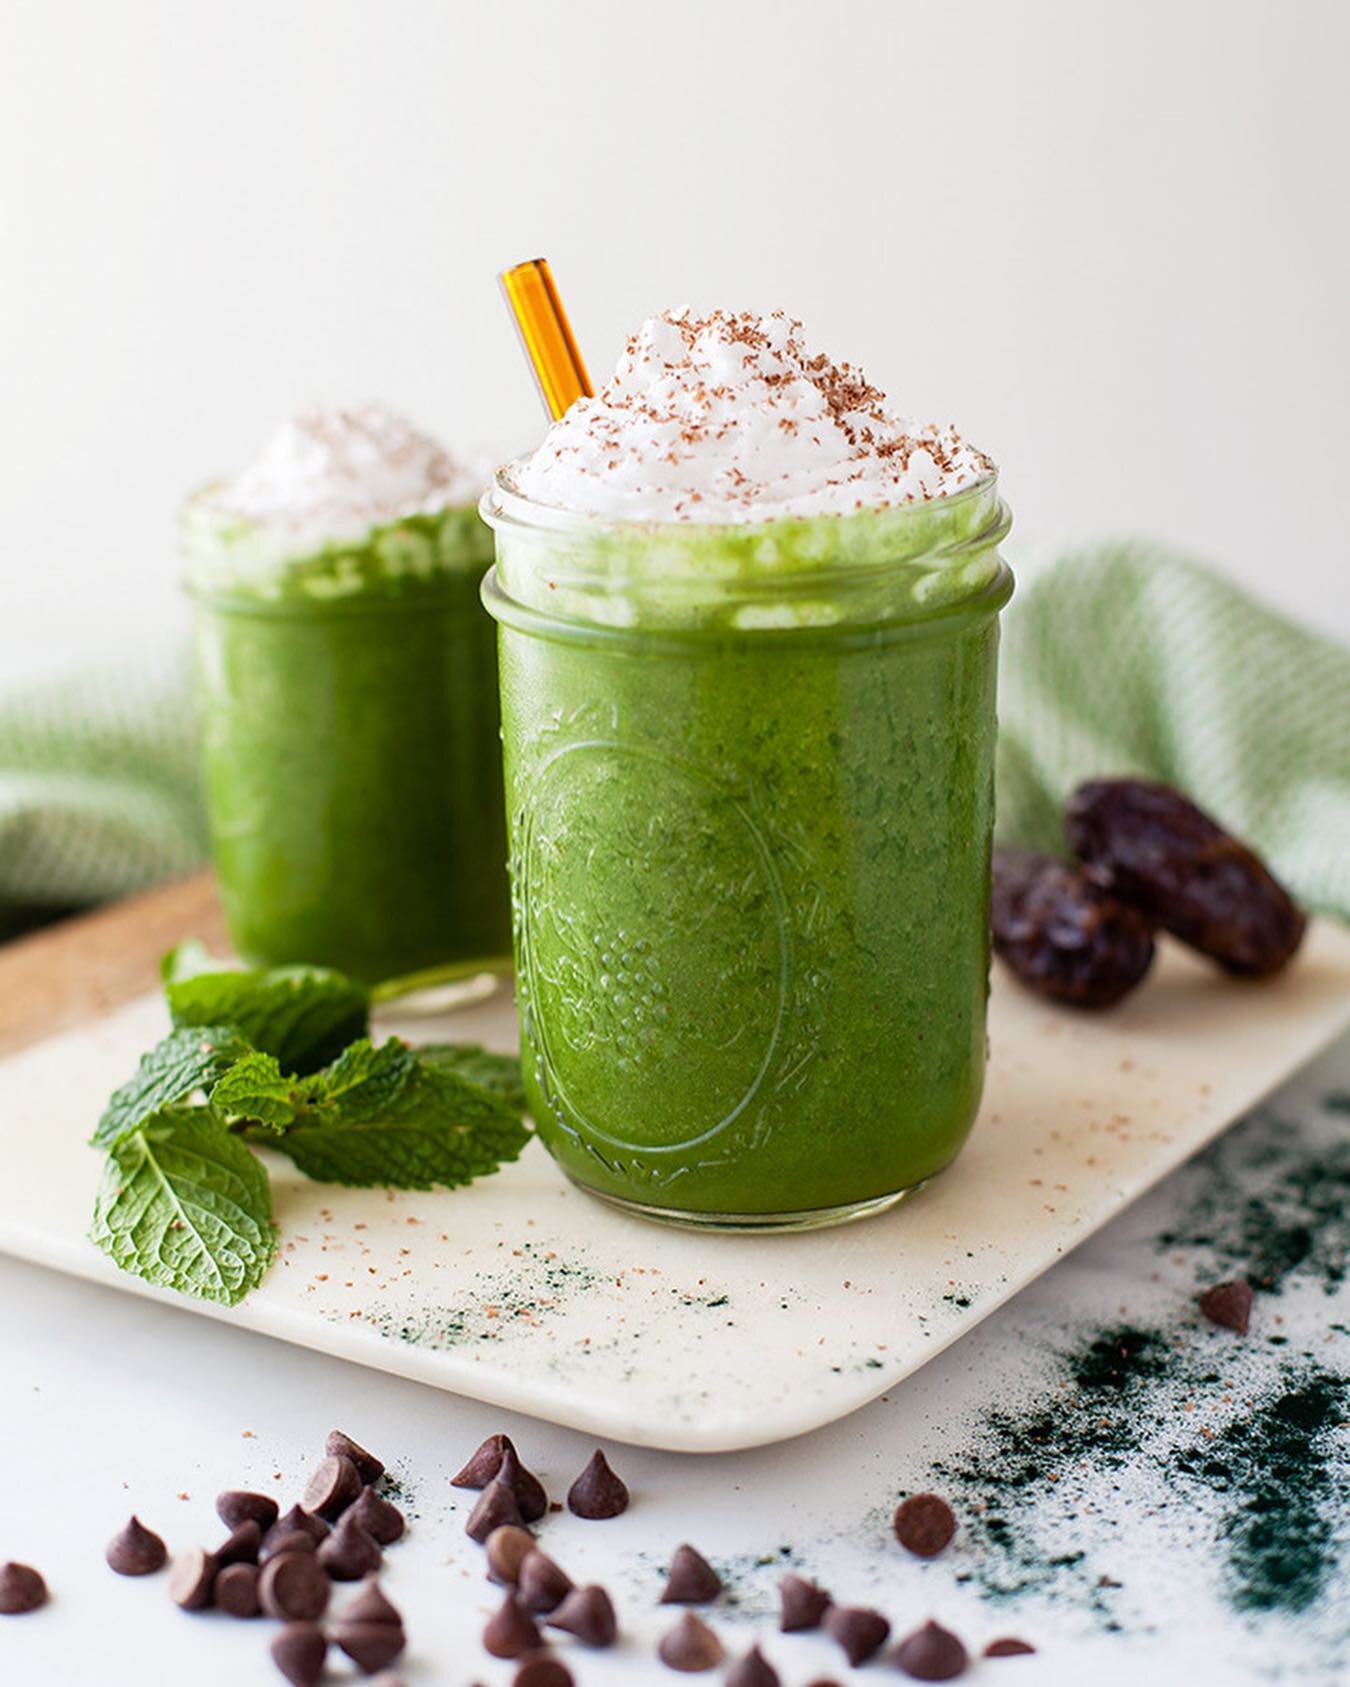 Is your green smoothie game getting boring? Well you gotta try out our Dreamy Minty Green Smoothie then! Don't wait another minute, it's so easy, delicious, and sooo healthy packing 3 different fruits and vegetables and loaded with the lesser known s